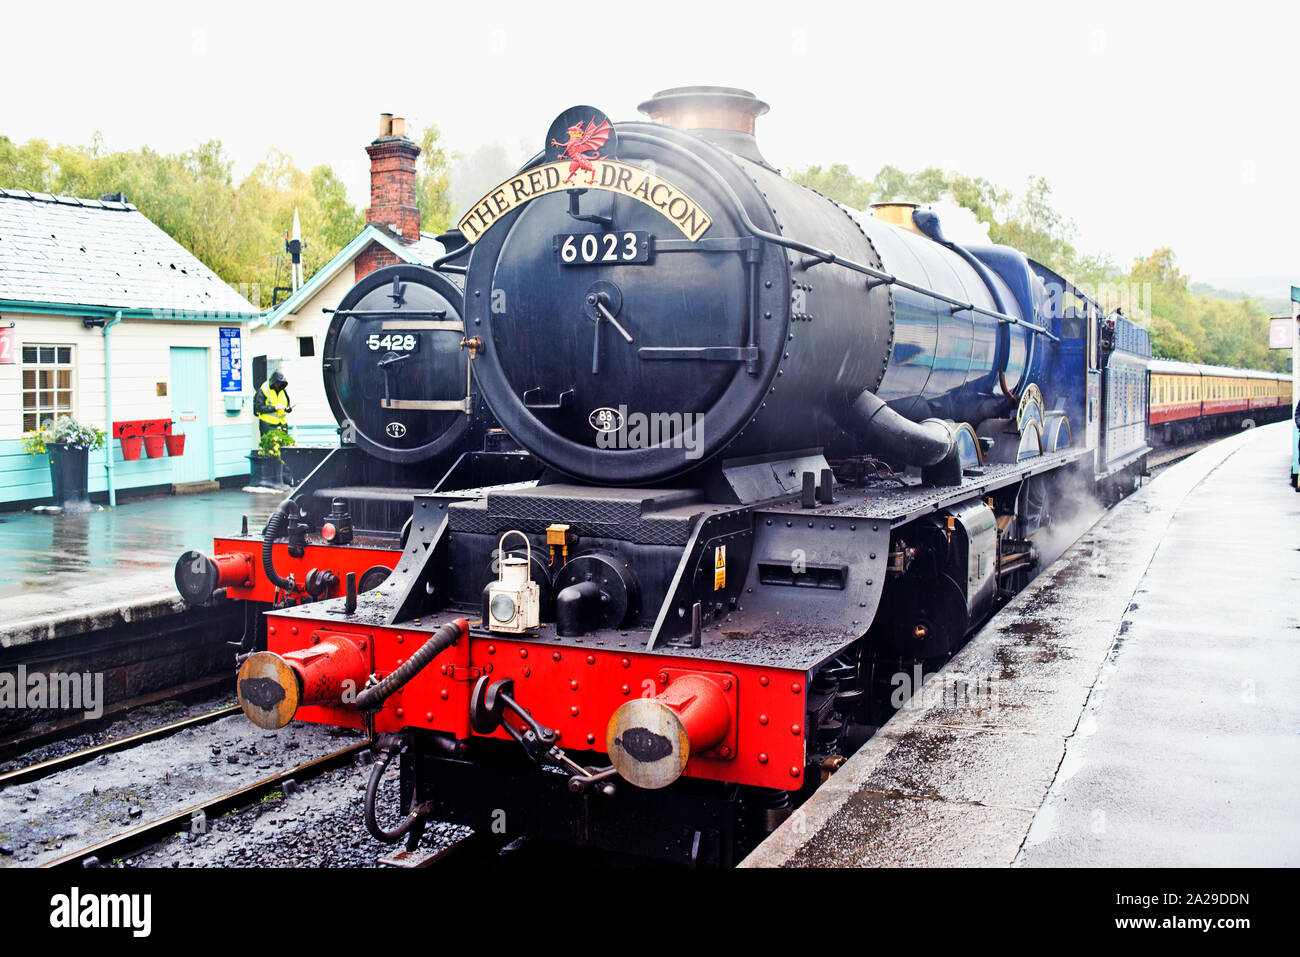 King Class Steam Engine No 6023 King Edward 11 at Grosmont, North Yorkshire Moors Railway, England Stock Photo